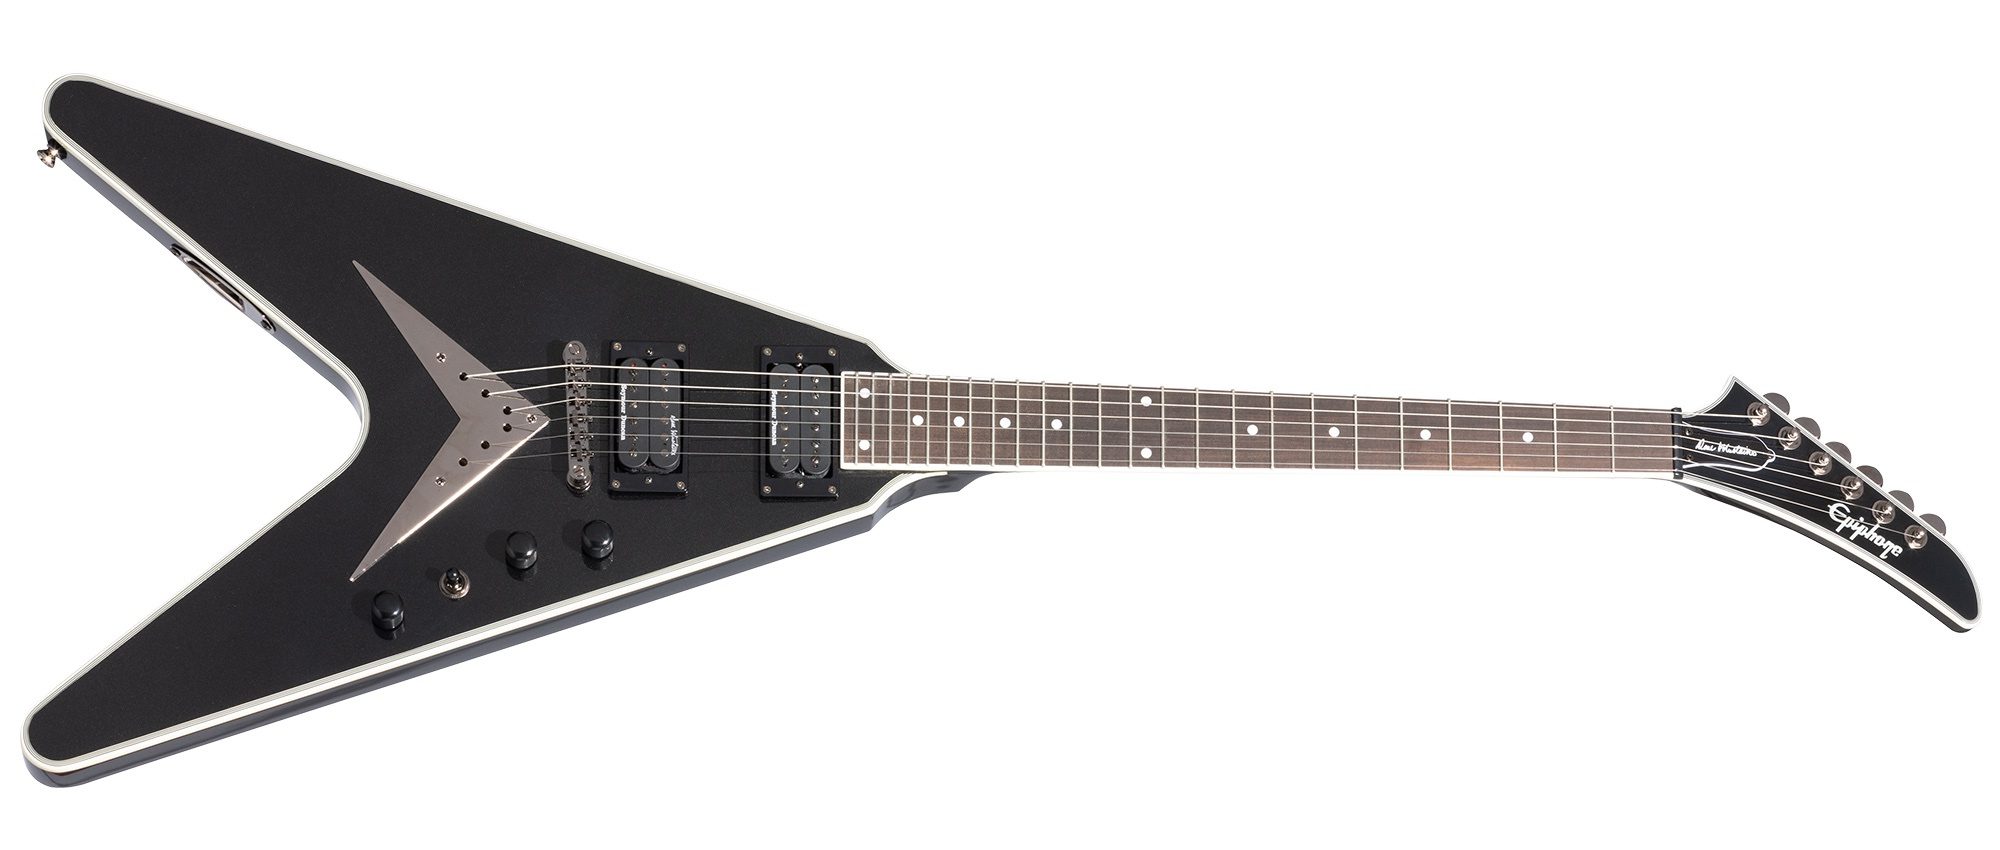 Epiphone Dave Mustaine Flying V Prophecy in Metallic Black